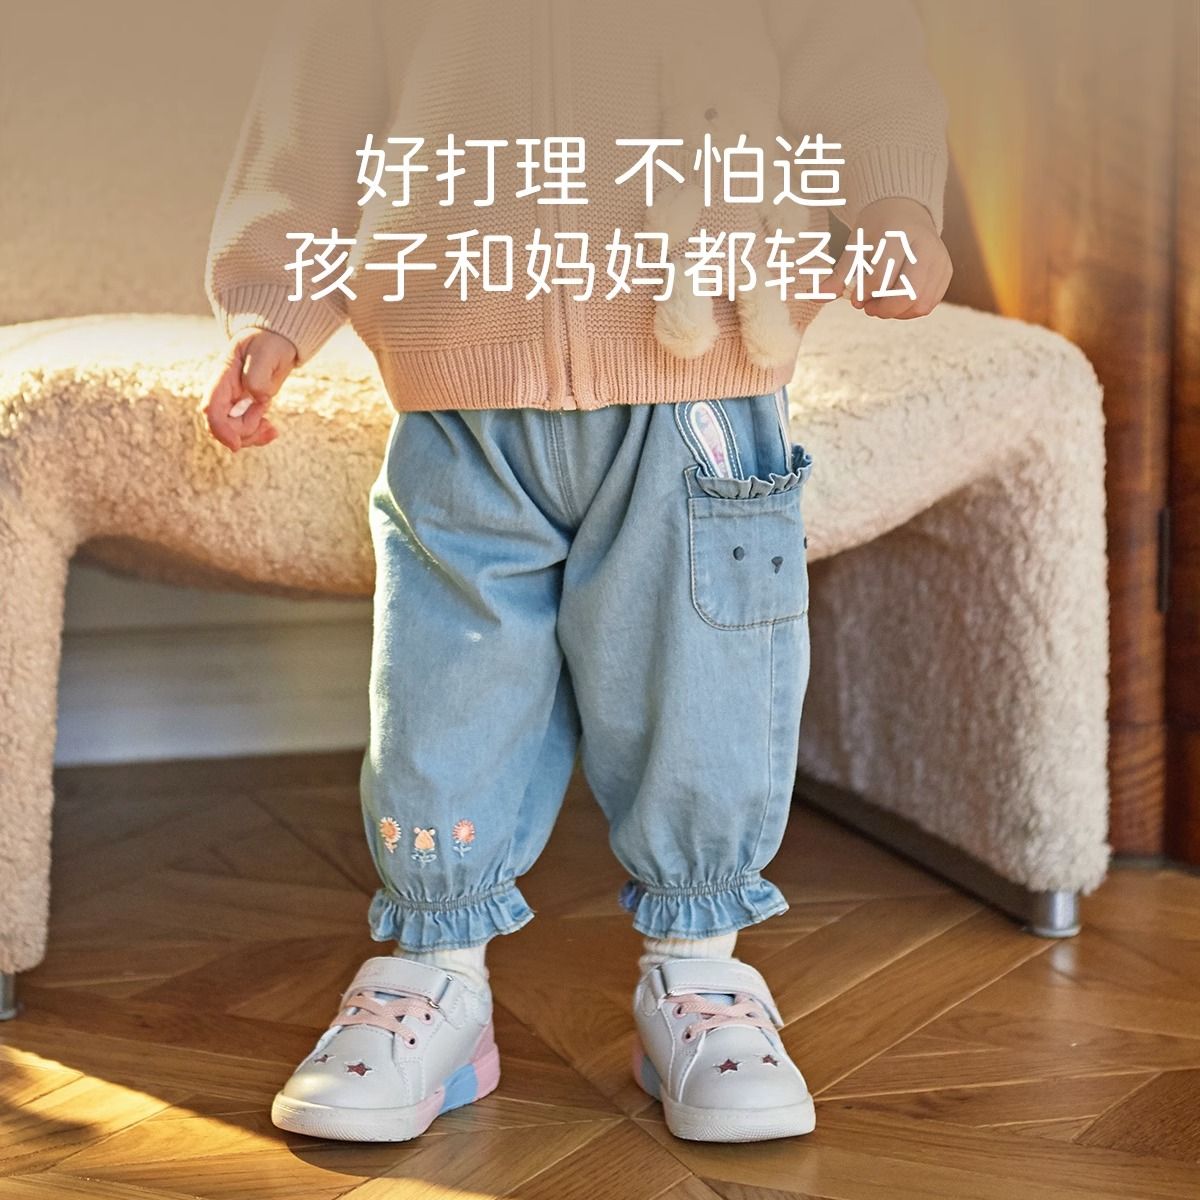 Girls' pure cotton jeans  autumn new style children's fashionable pants girls' casual trousers elastic waist children's clothing